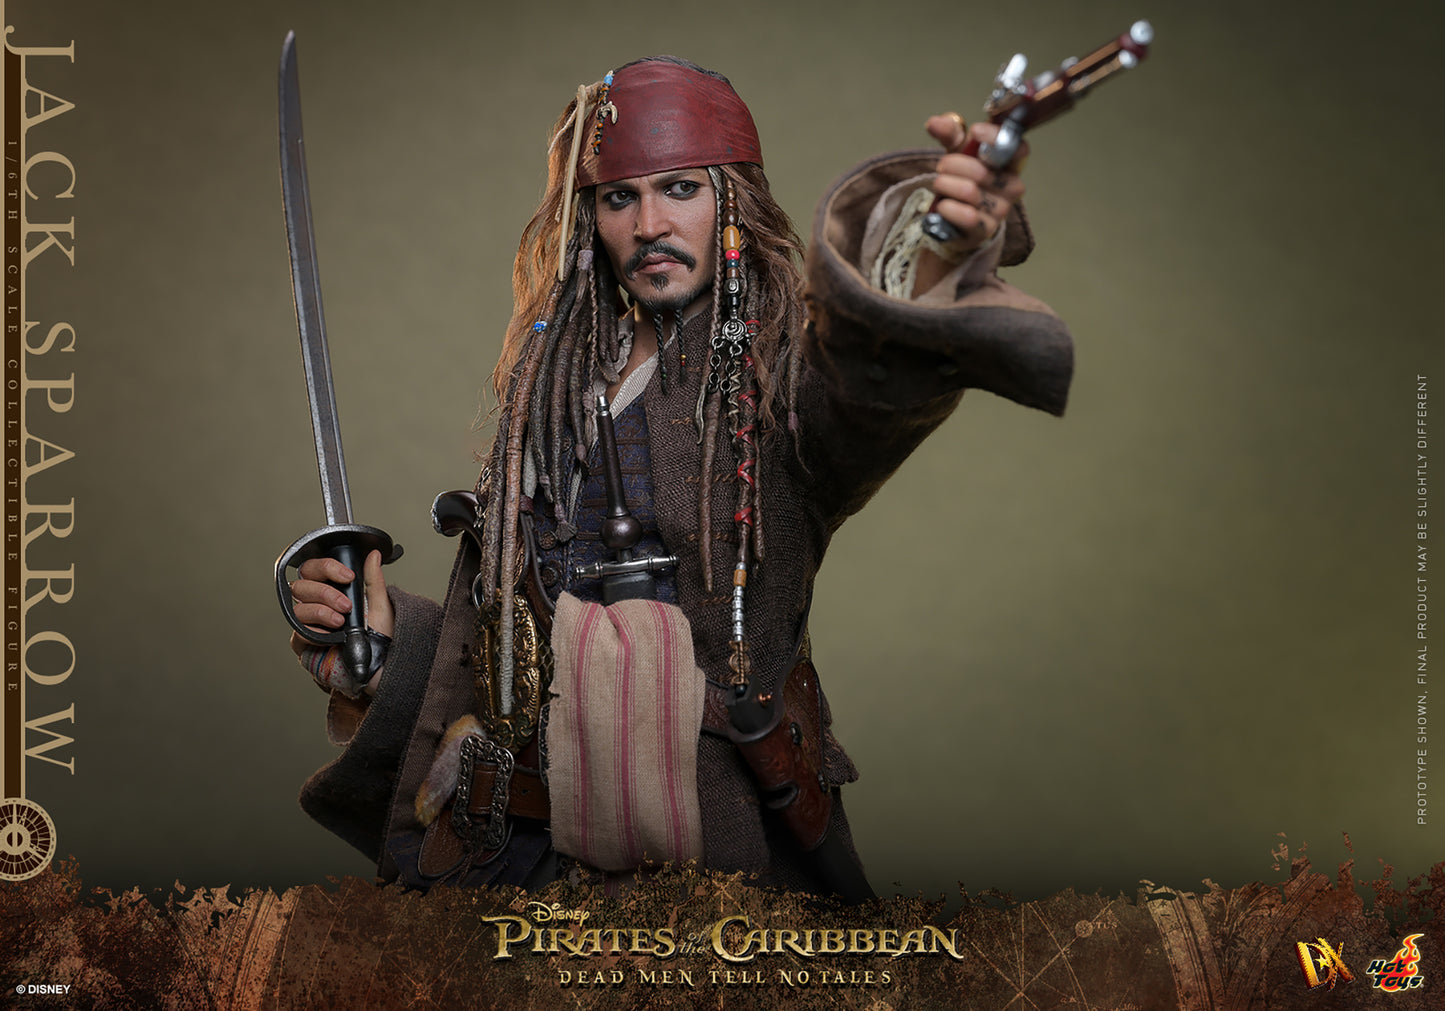 Jack Sparrow Sixth Scale Figure by Hot Toys